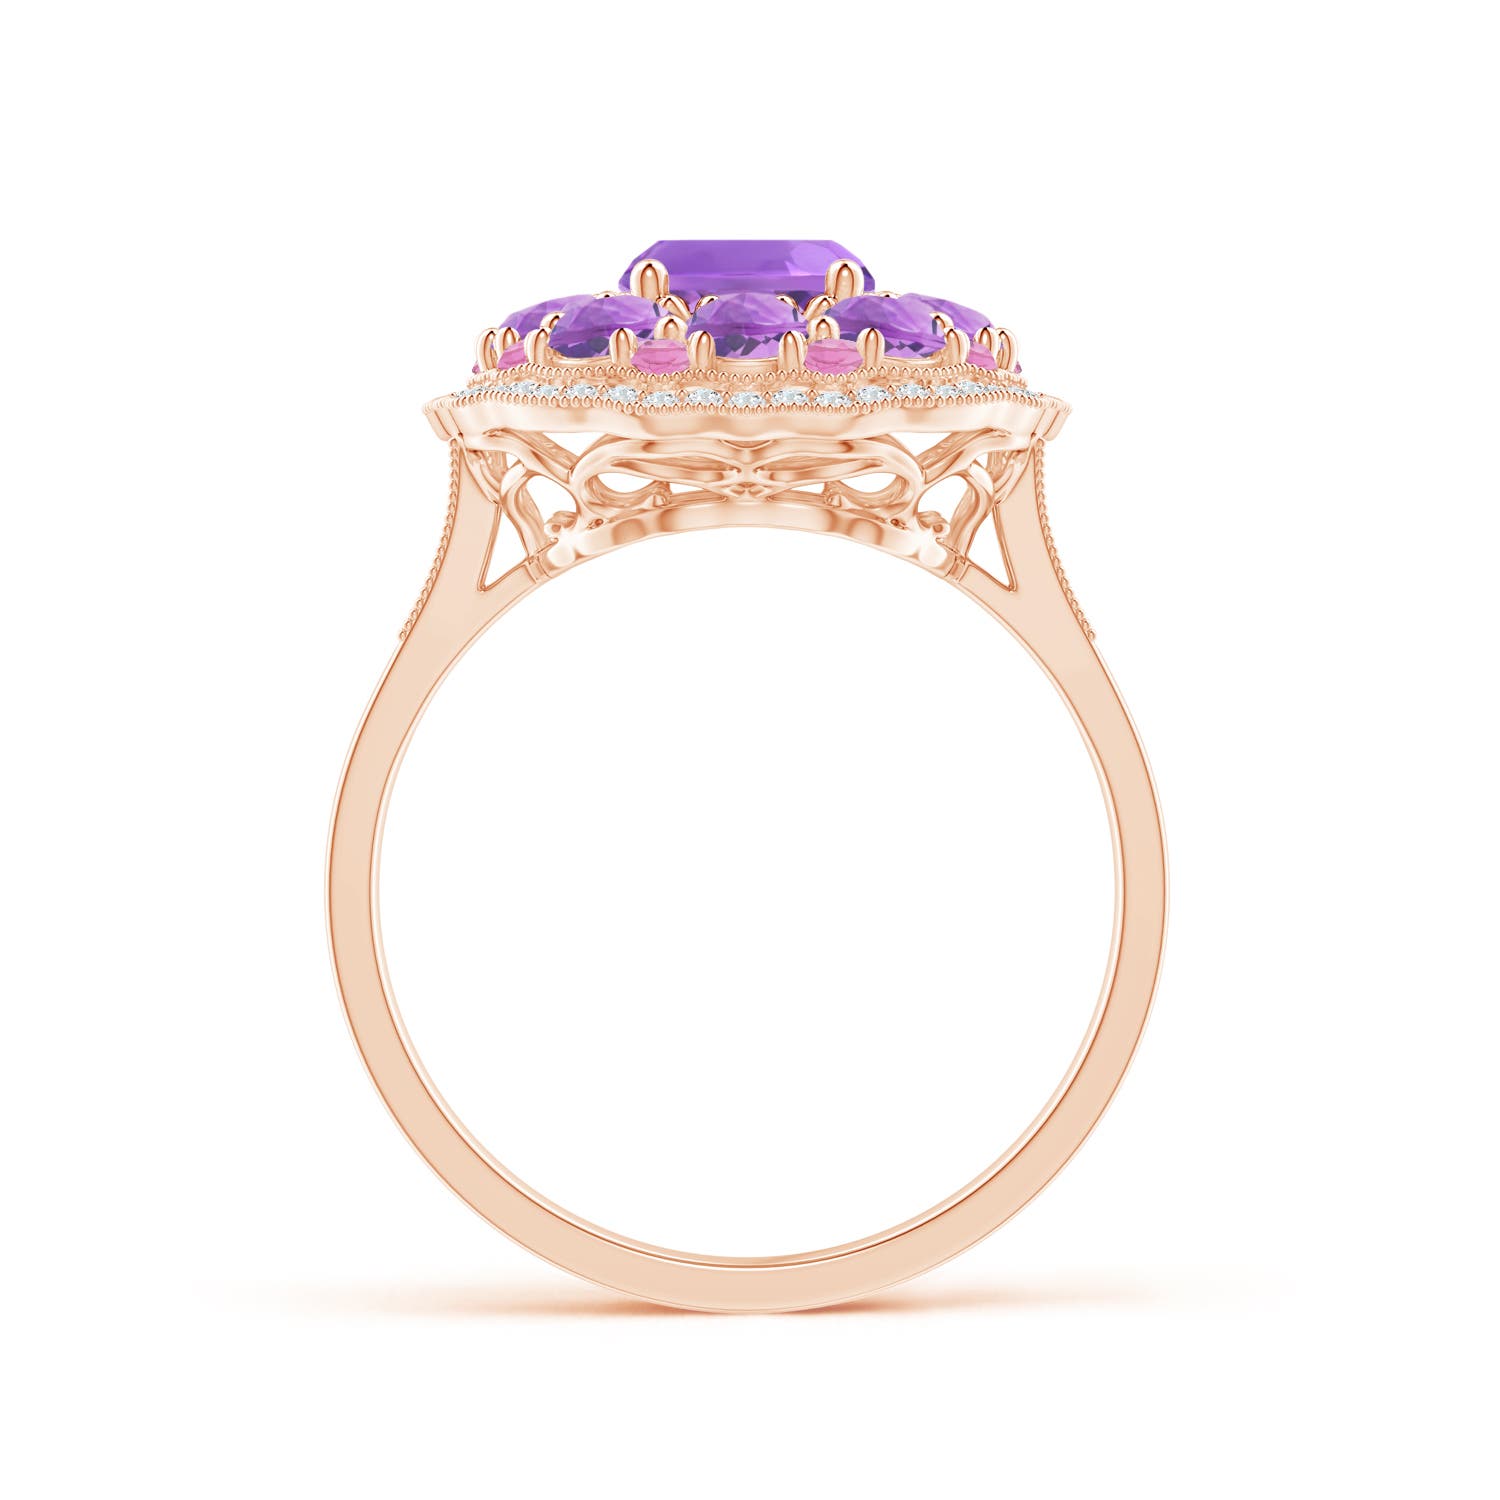 AA - Amethyst / 2.58 CT / 14 KT Rose Gold